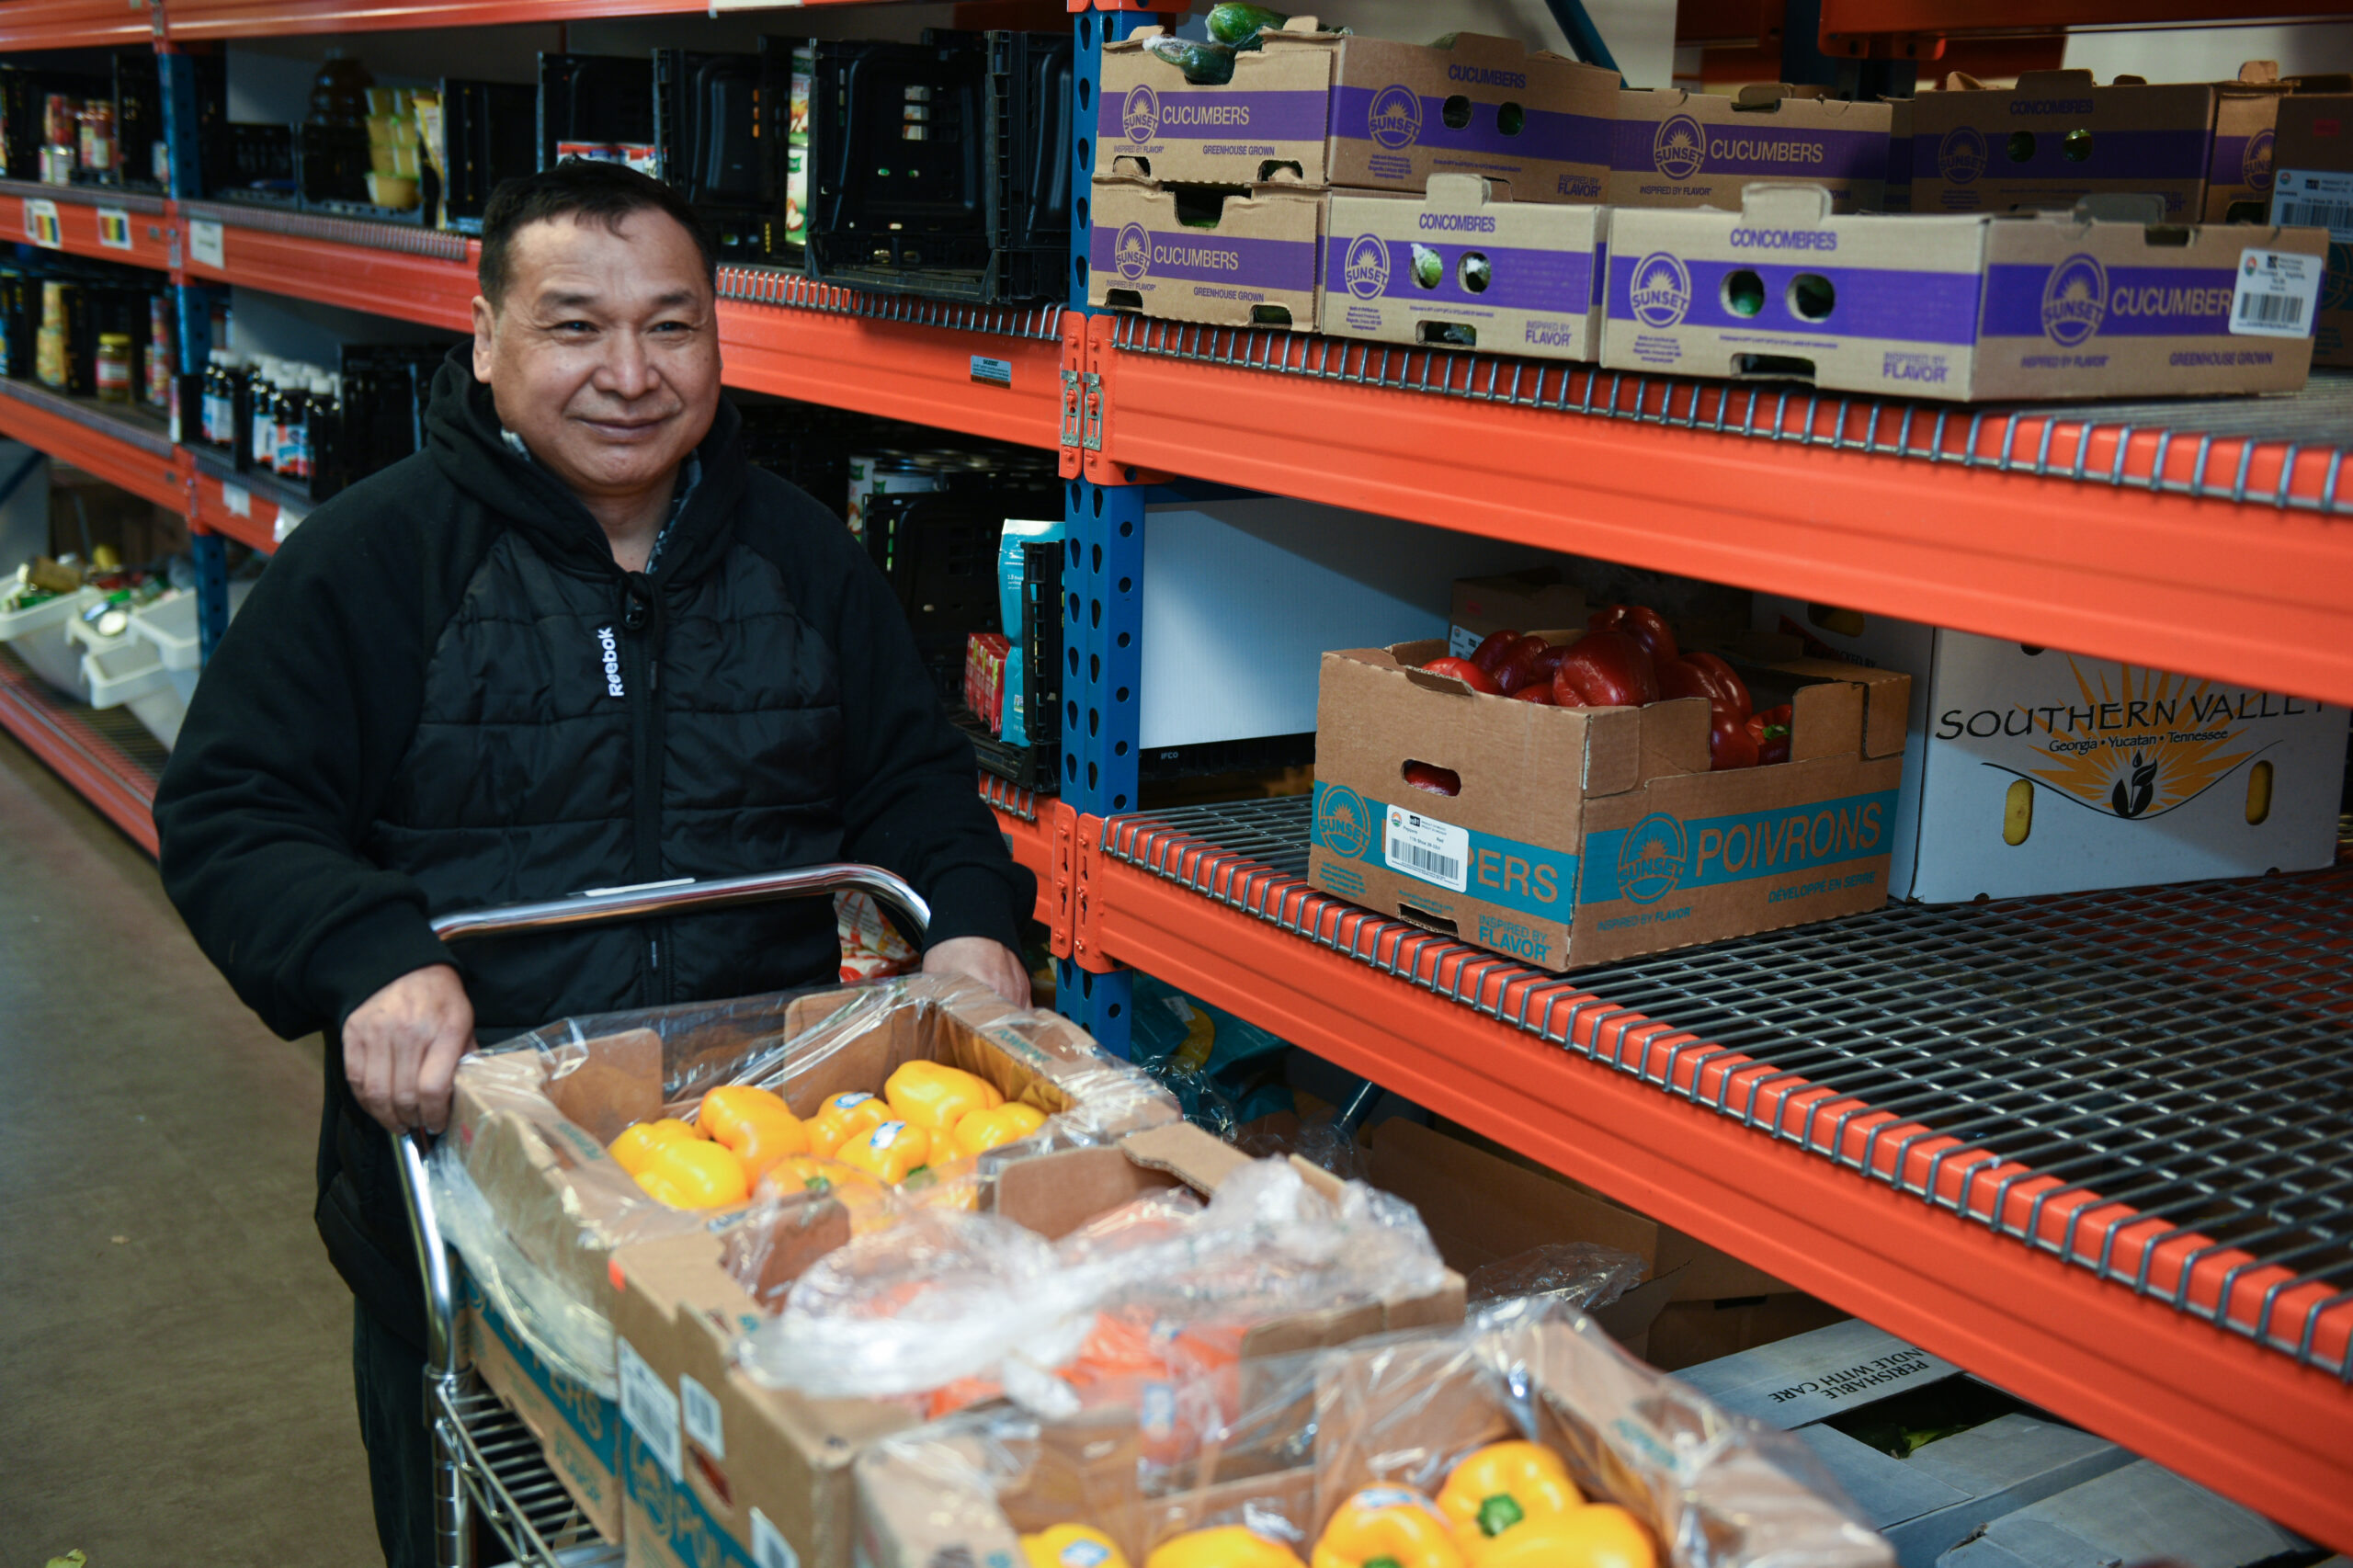 A smiling person pushing a cart of food at a food shelf distribution center